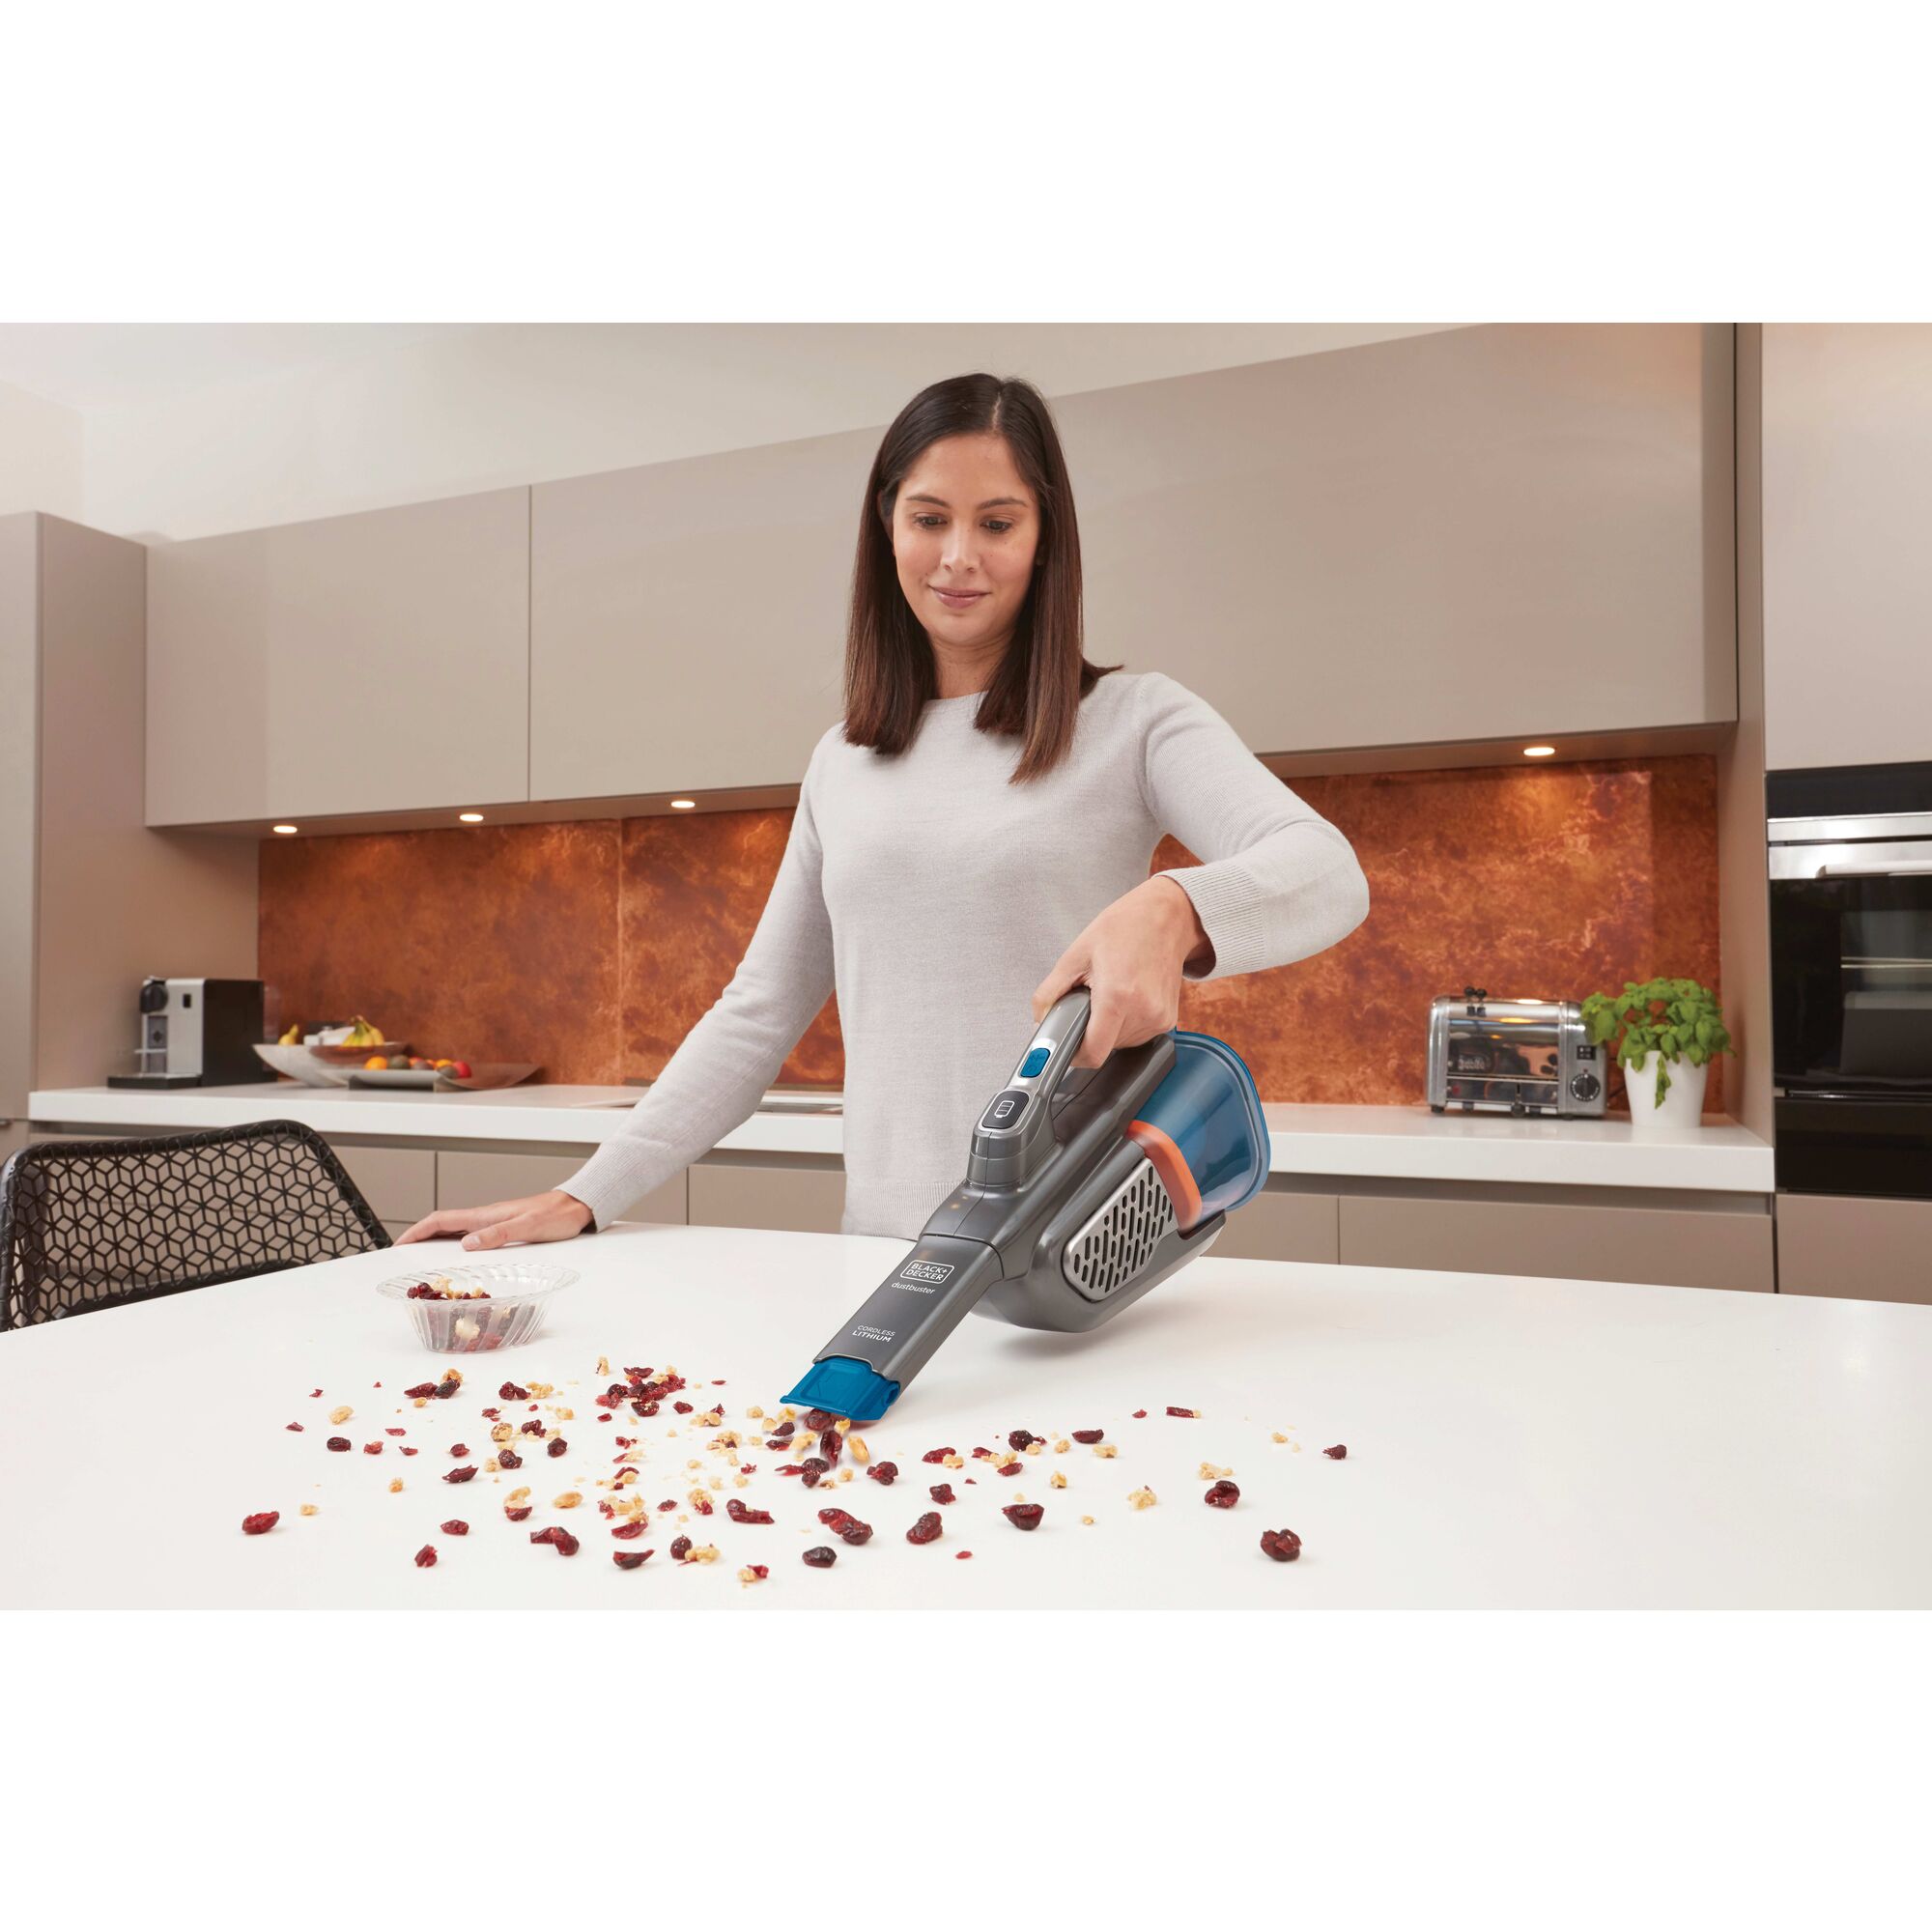 Woman cleaning kitchen counter with BLACK+DECKER dustbuster